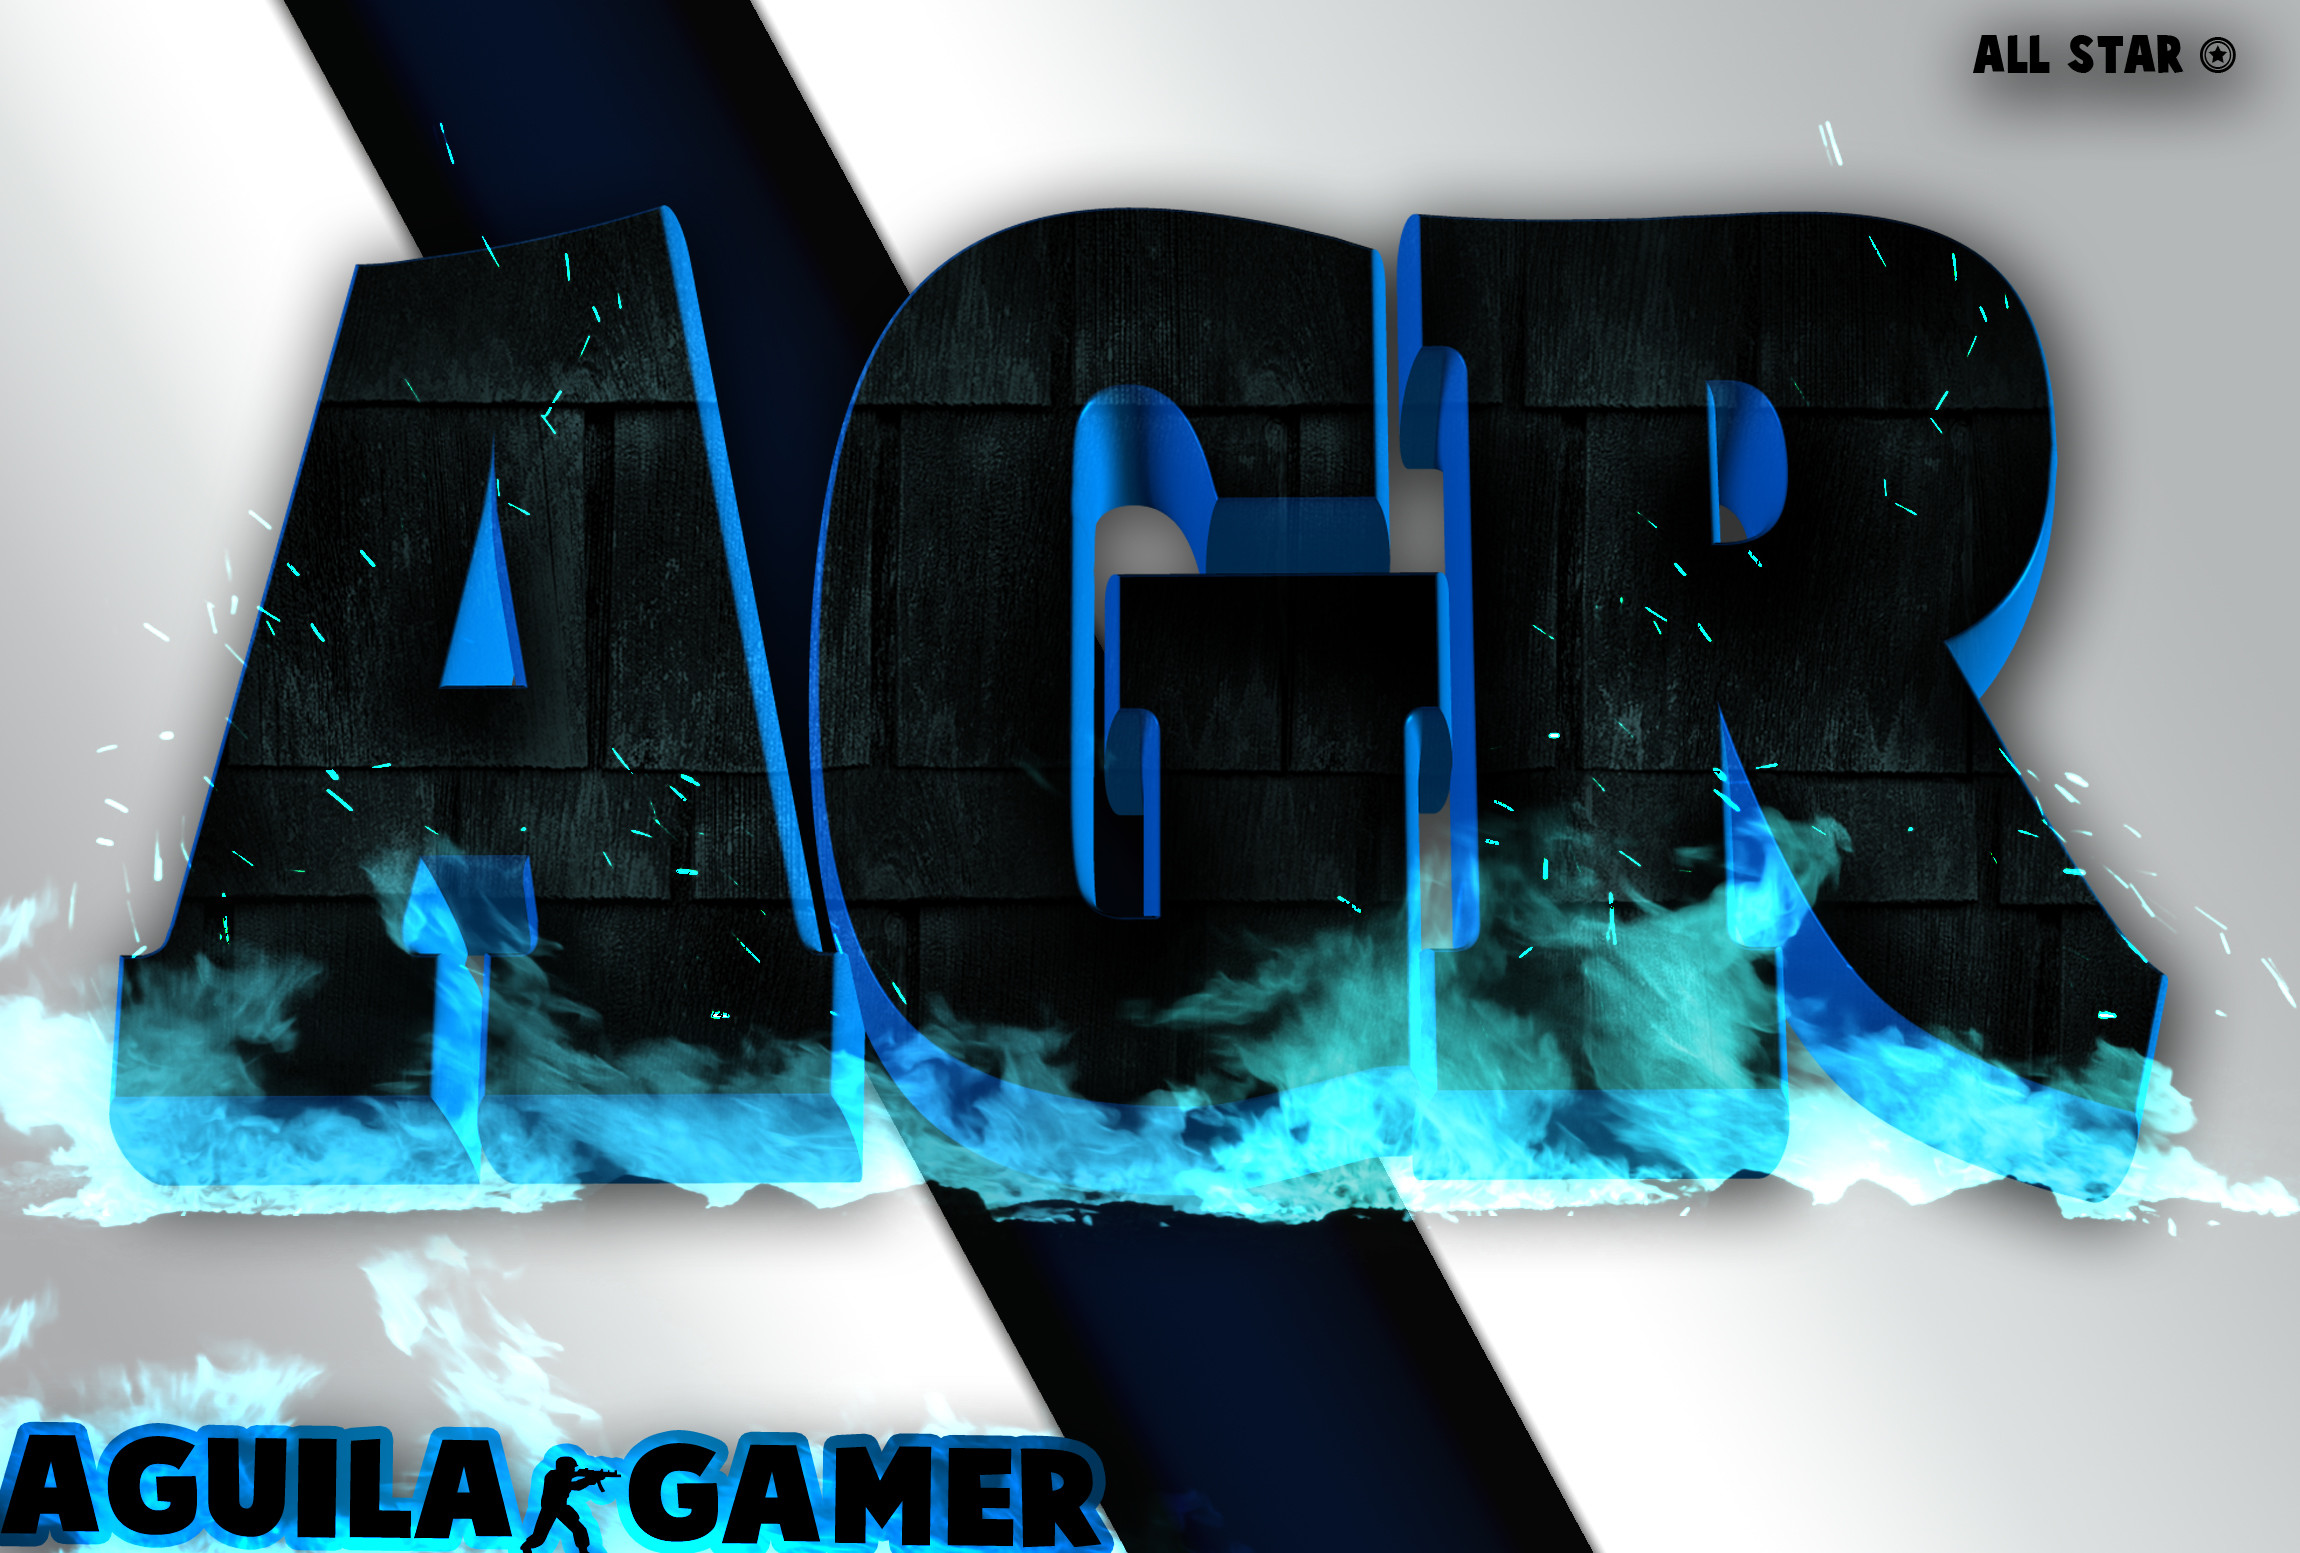 2300x1553 ... Blue fire AGR logo/wallpaper by Thepedro0403